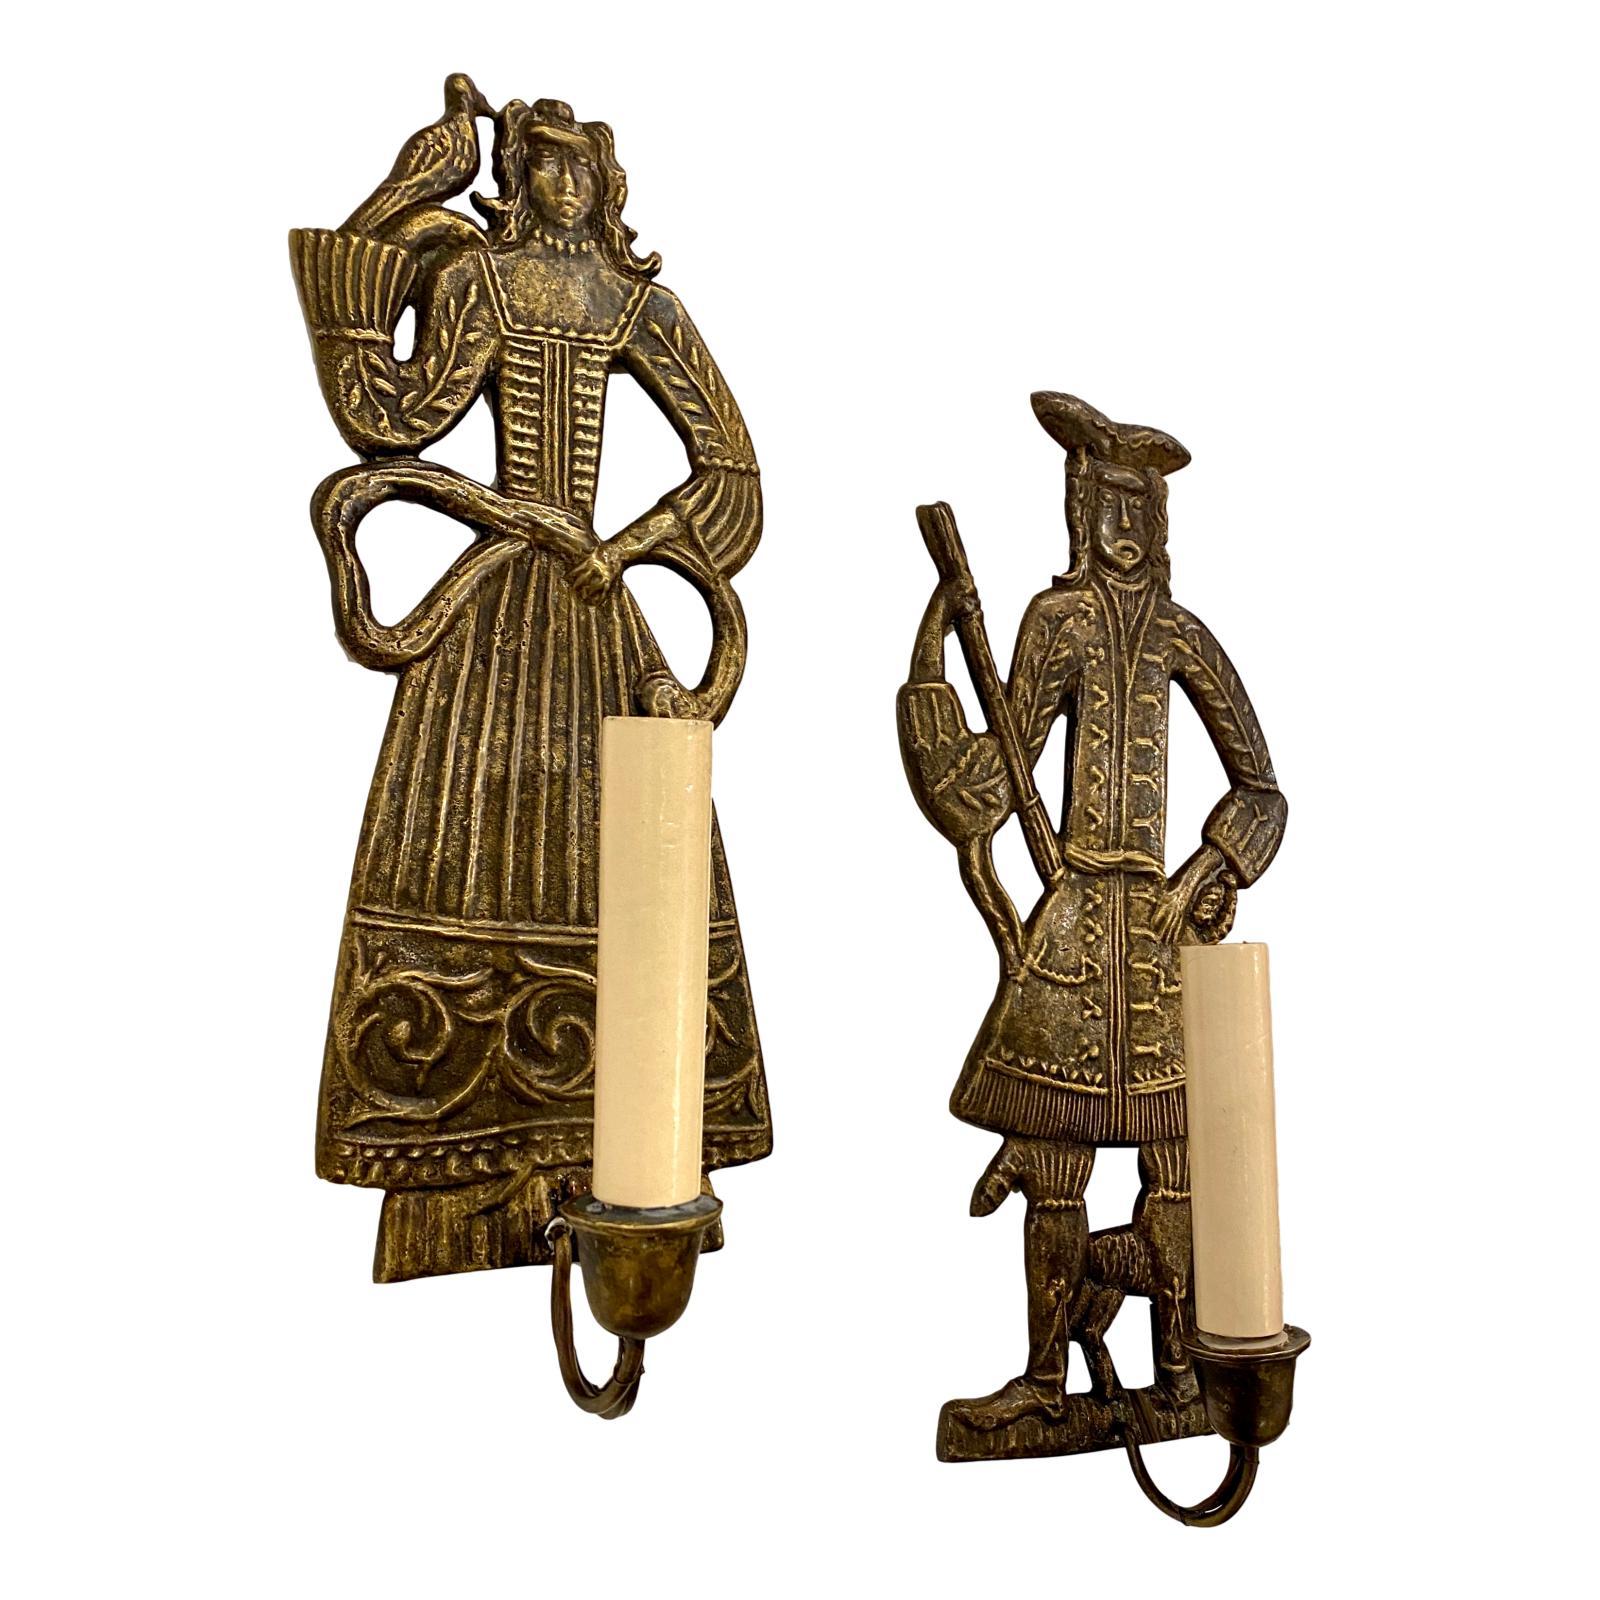 Pair of circa 1940s Dutch cast and patinated bronze figural sconces with original patina.

Measurements:
Height 12